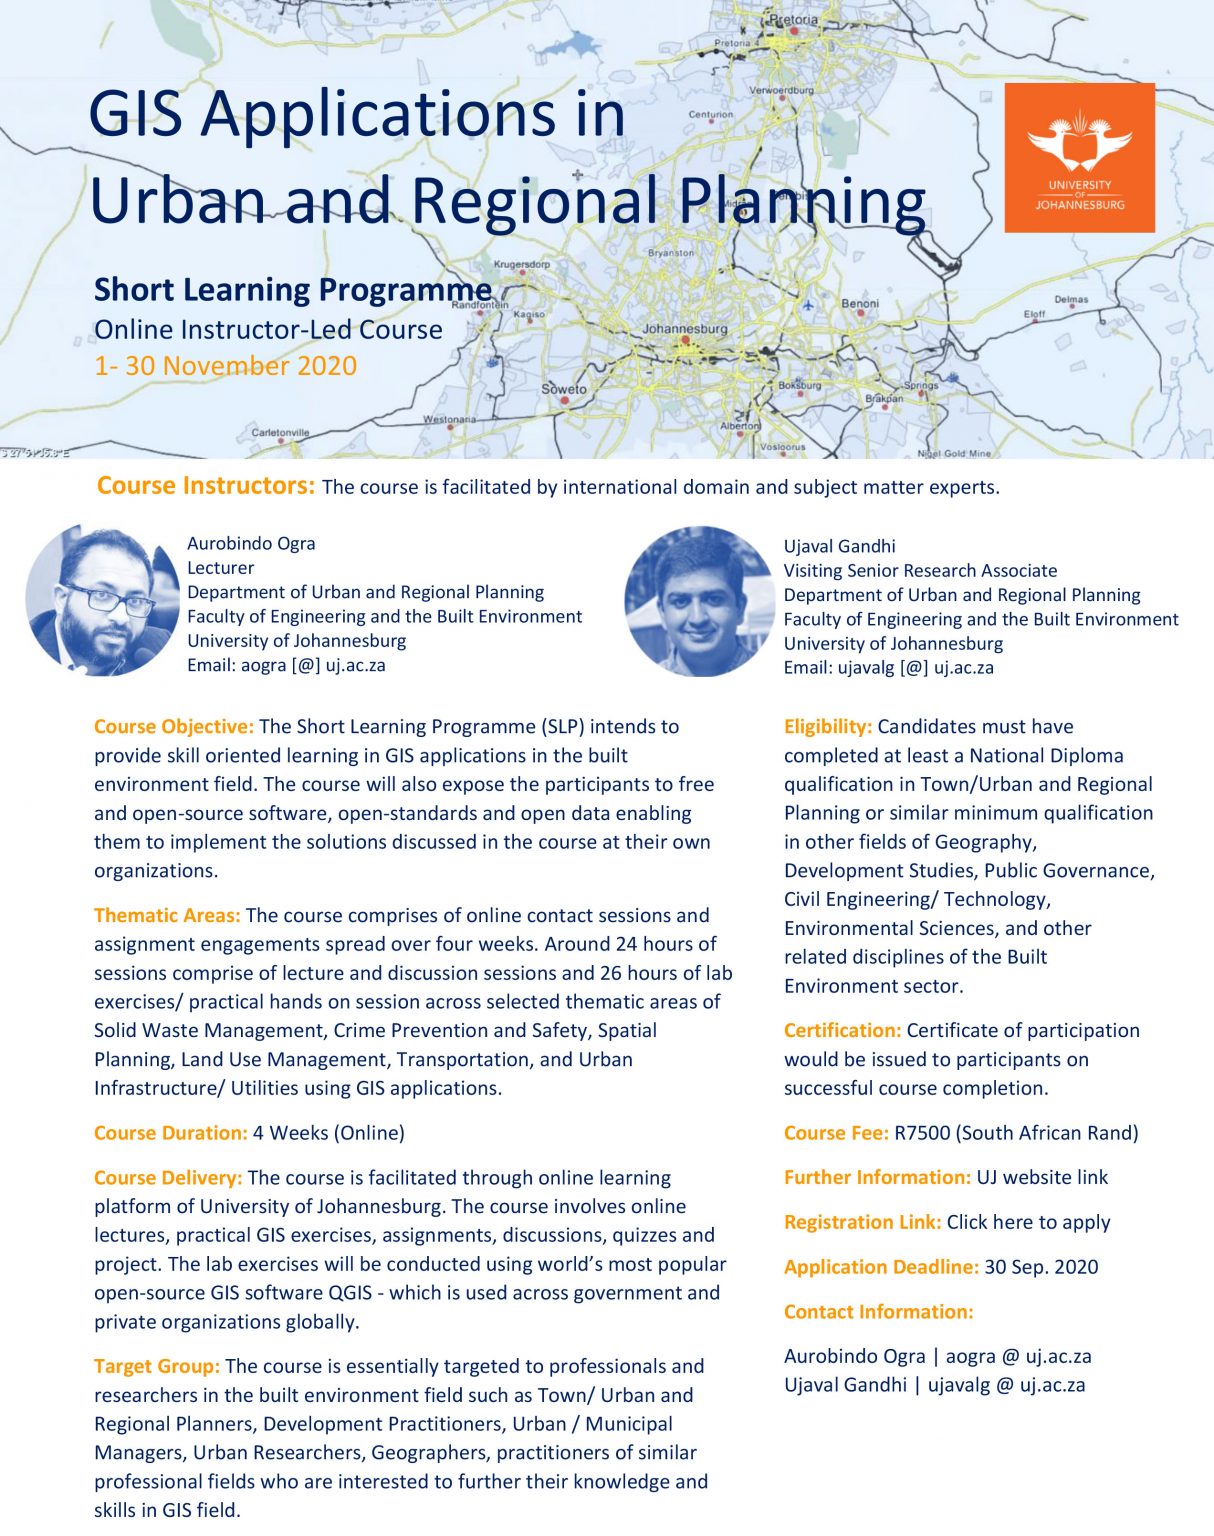 phd in town and regional planning